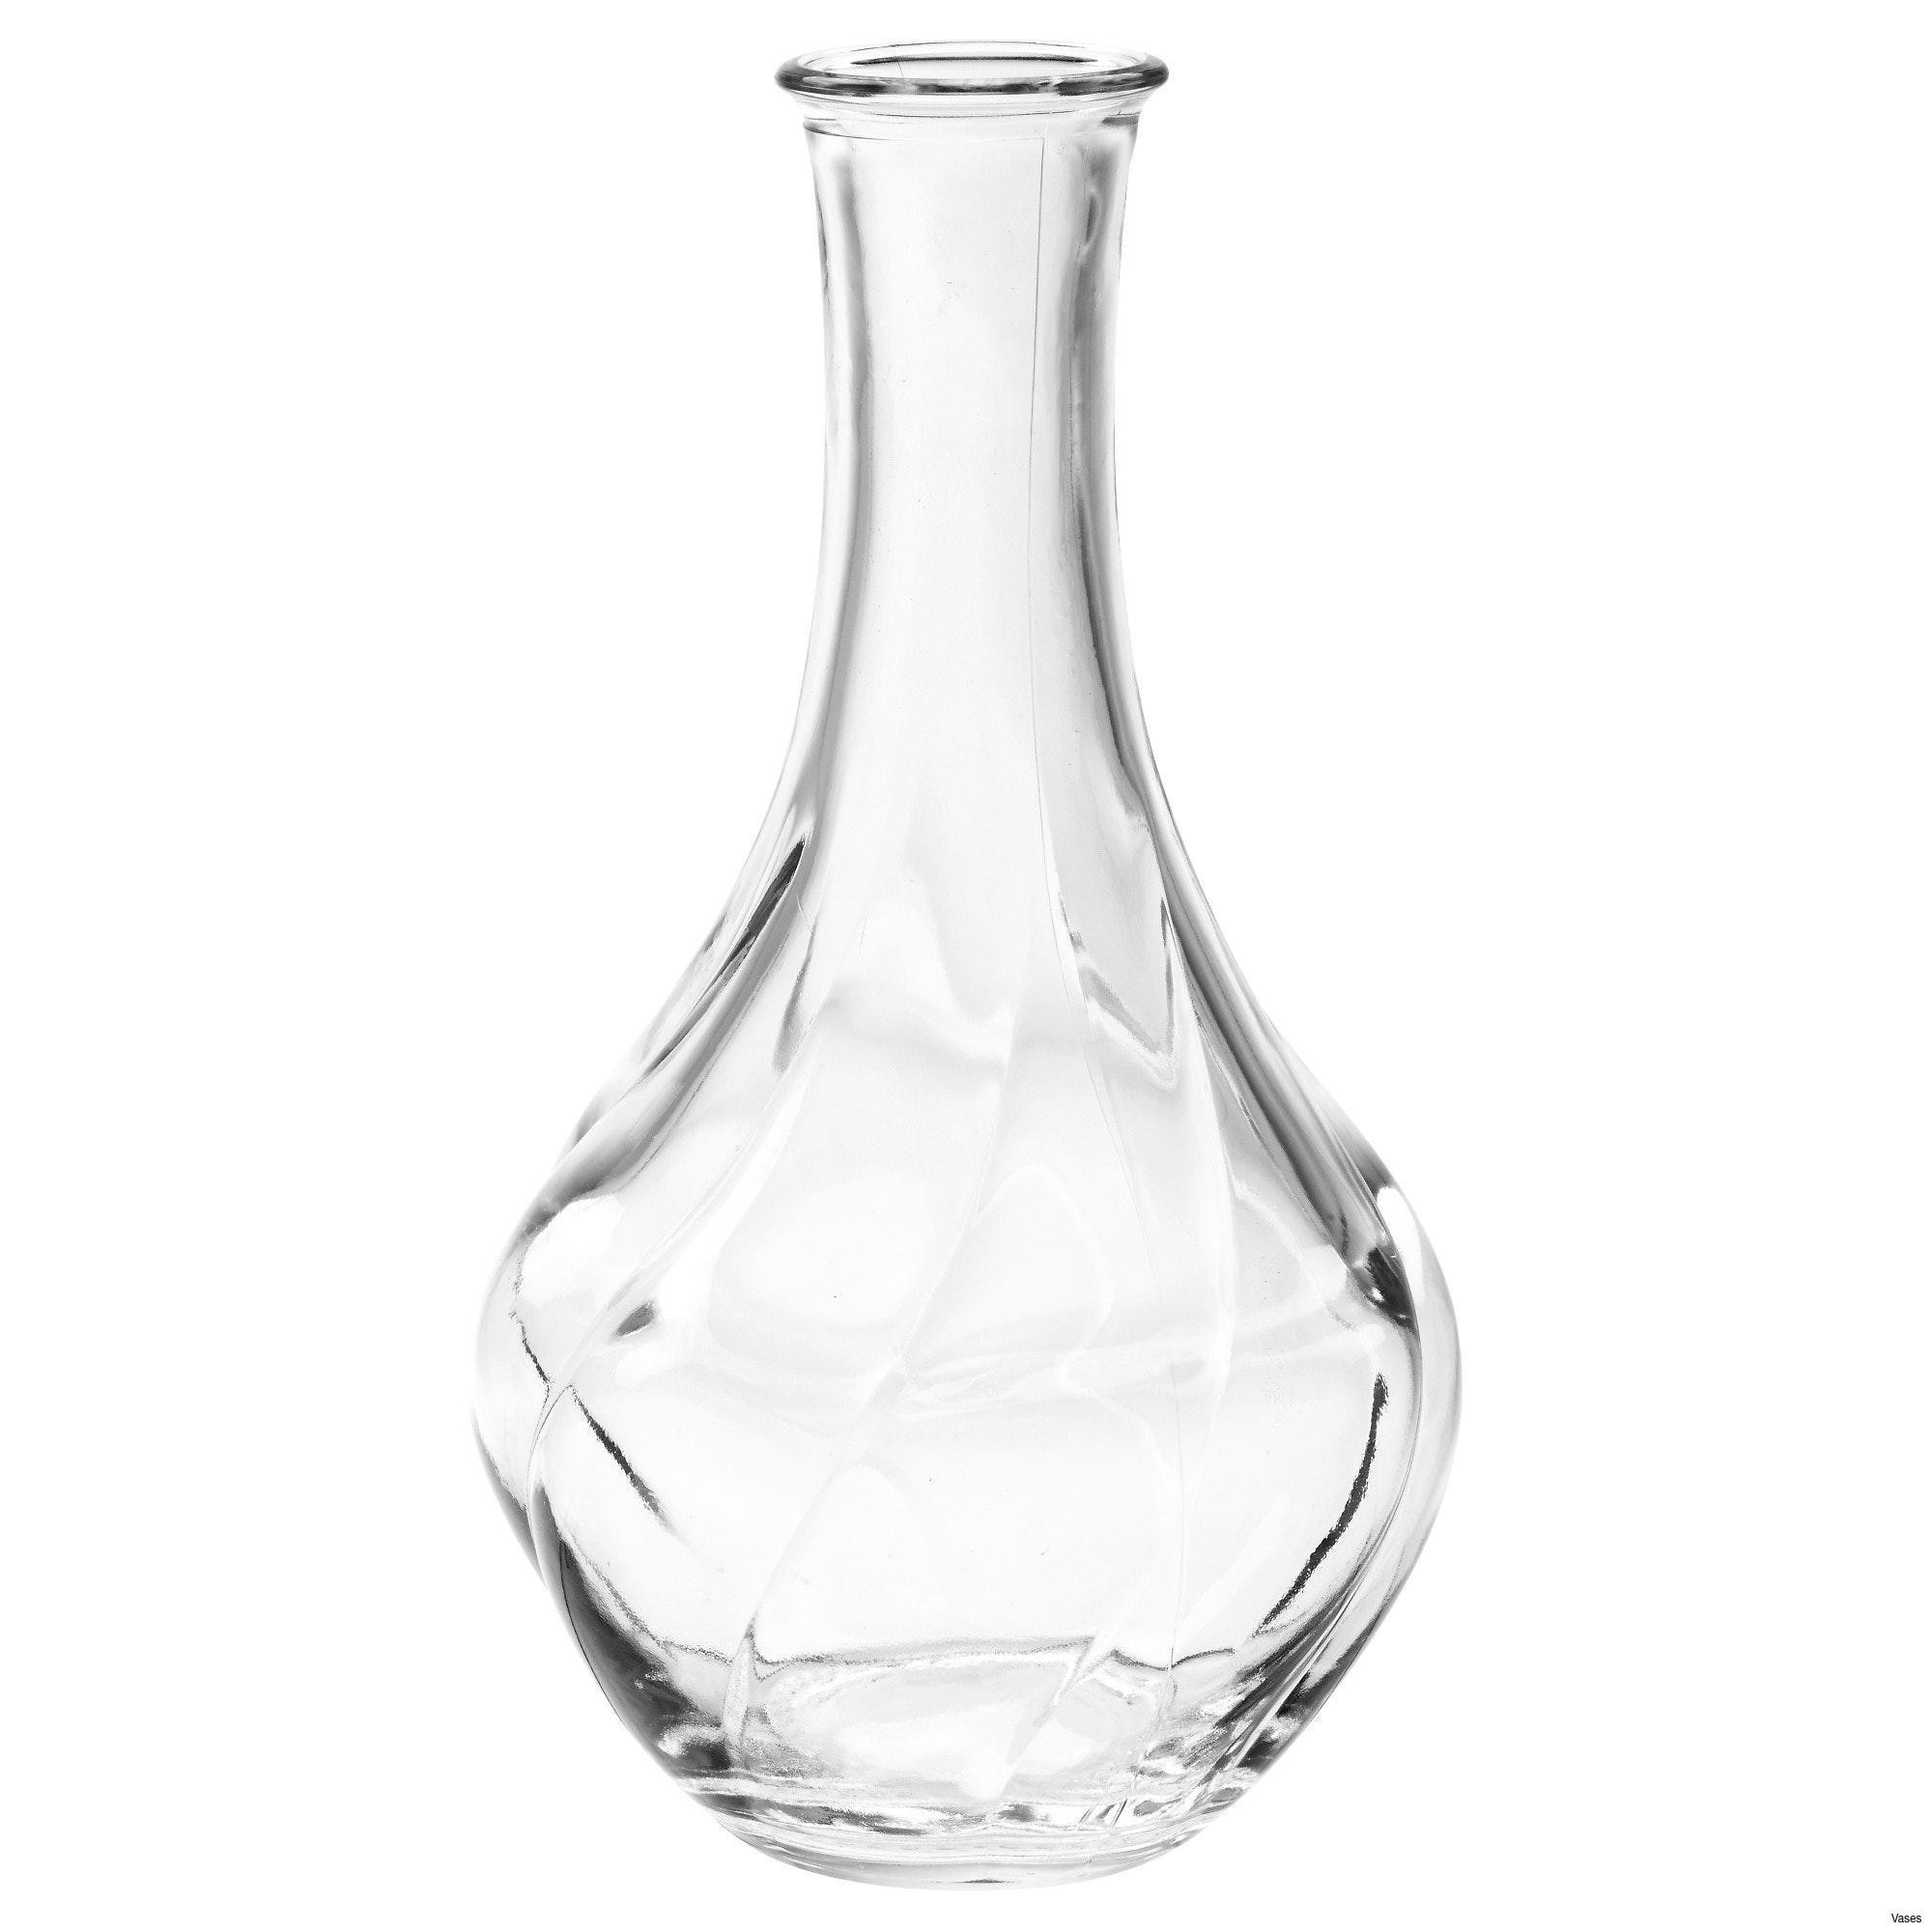 25 Lovely Square Crystal Vase 2024 free download square crystal vase of large white vases photos living room glass vases fresh clear vase 0d within large white vases photos living room glass vases fresh clear vase 0d tags amazing and of